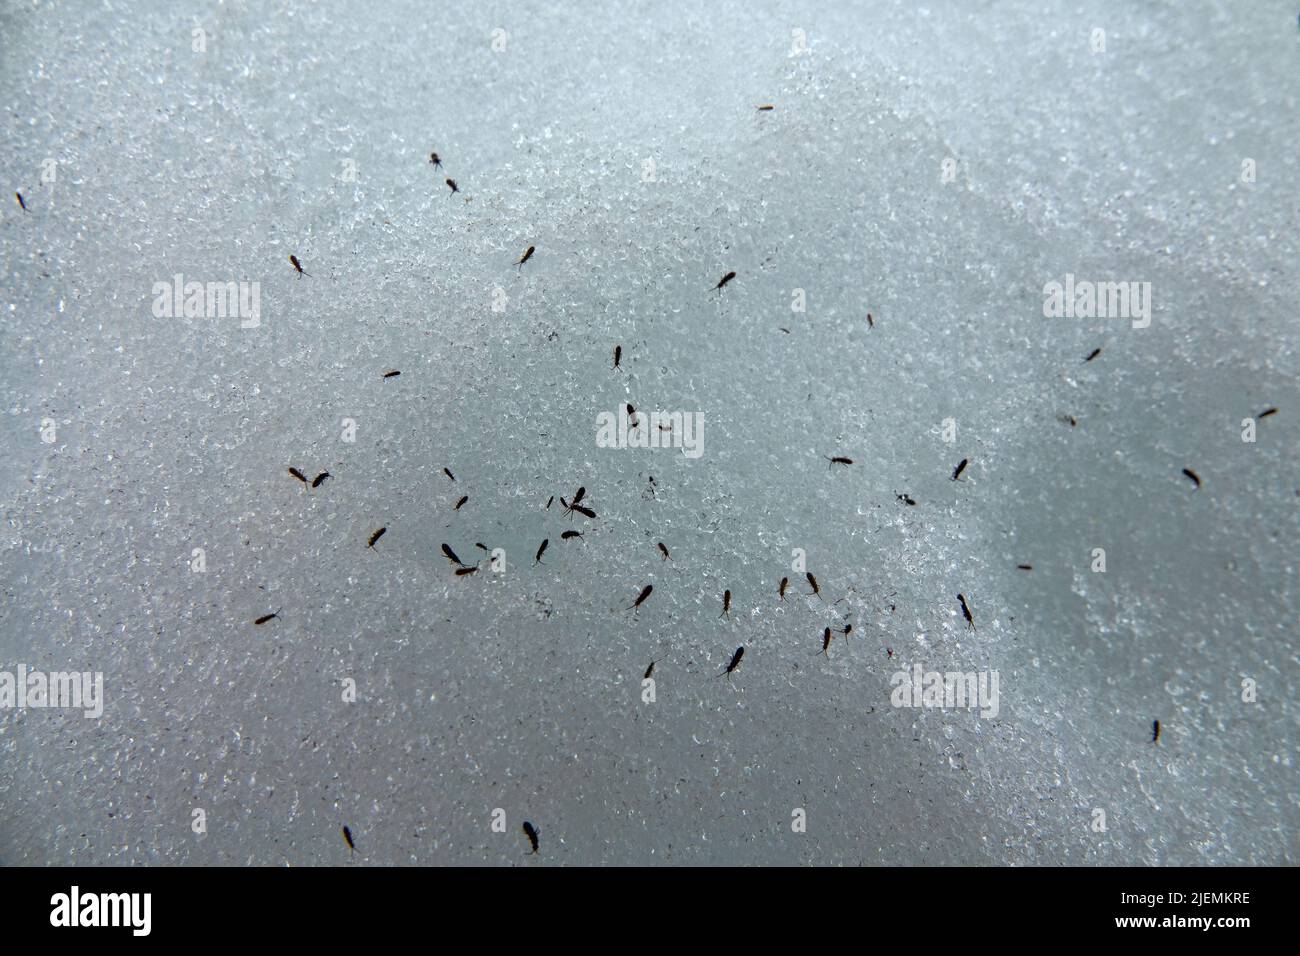 Glacier flea (Isotoma saltans) come out after hibernation for reproduction in northern latitudes when it is still winter (thaw). Collembolas accumulat Stock Photo